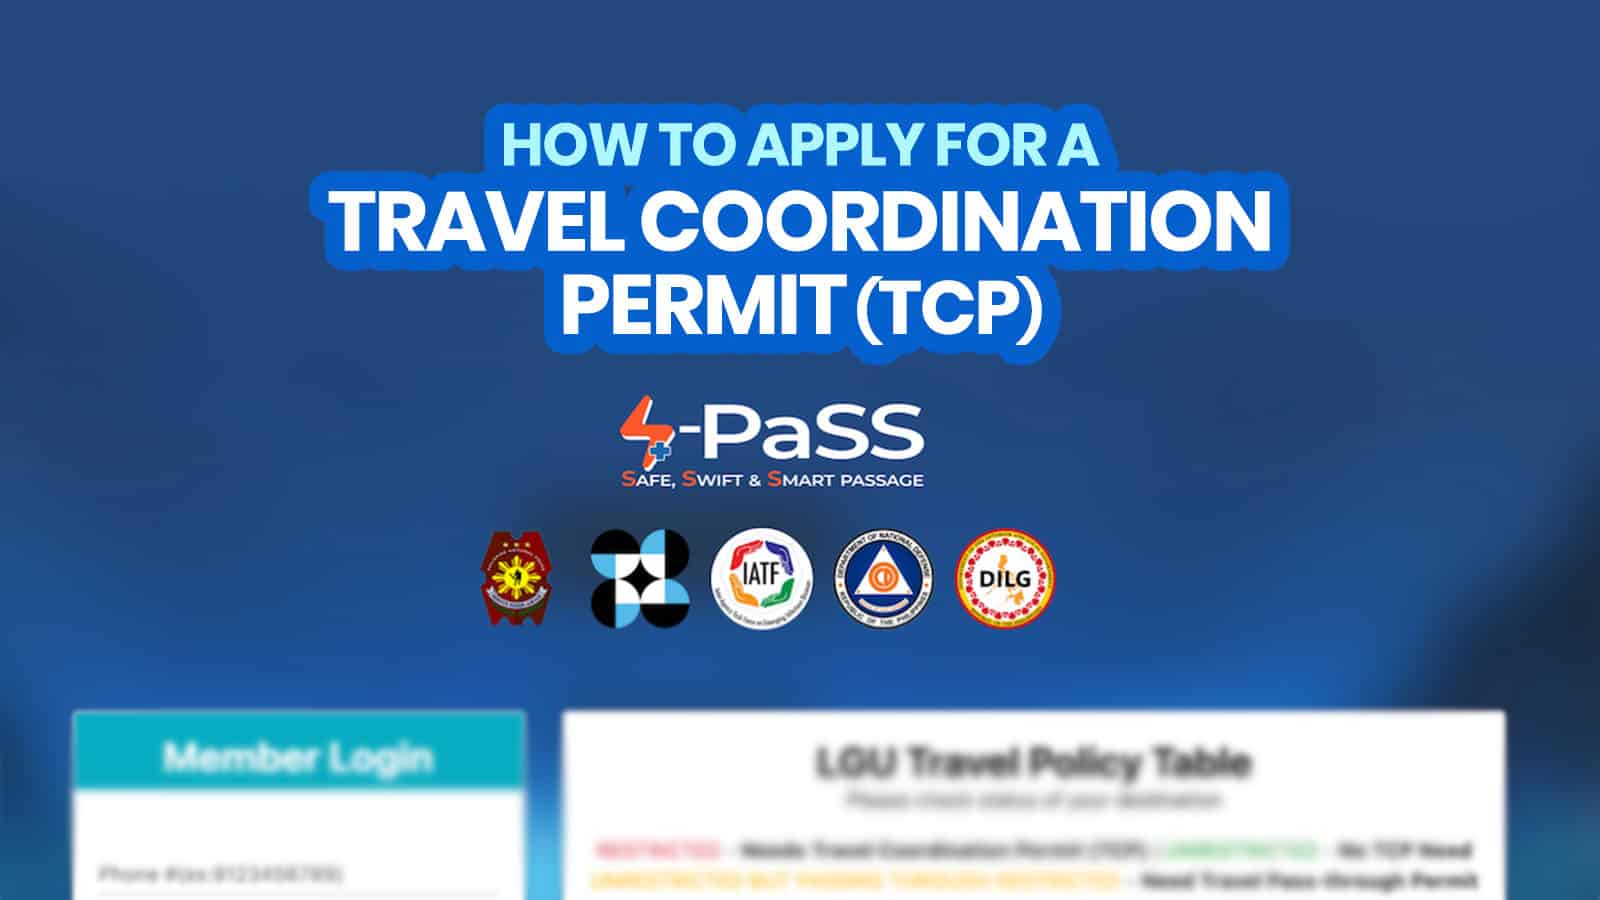 How to Get S-PASS: TRAVEL COORDINATION PERMIT (TCP)